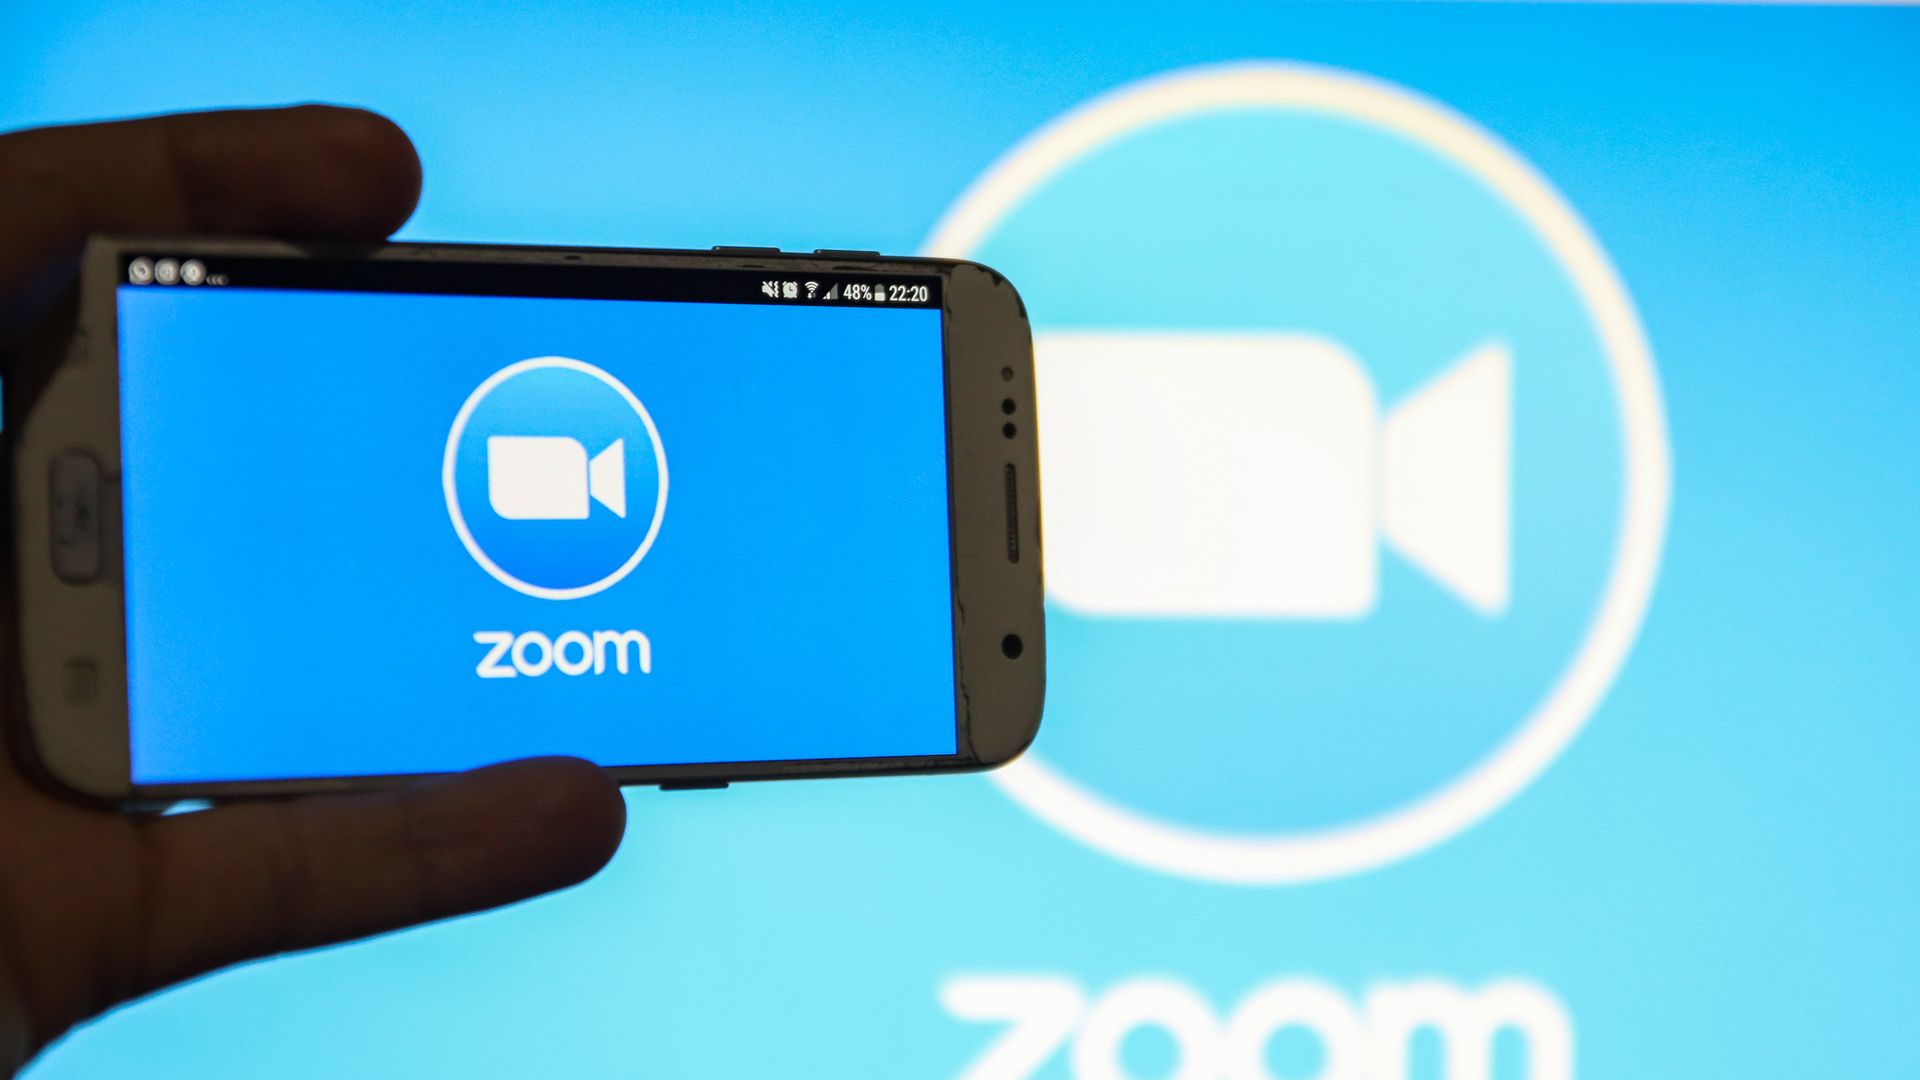 A phone and a background with the Zoom logo